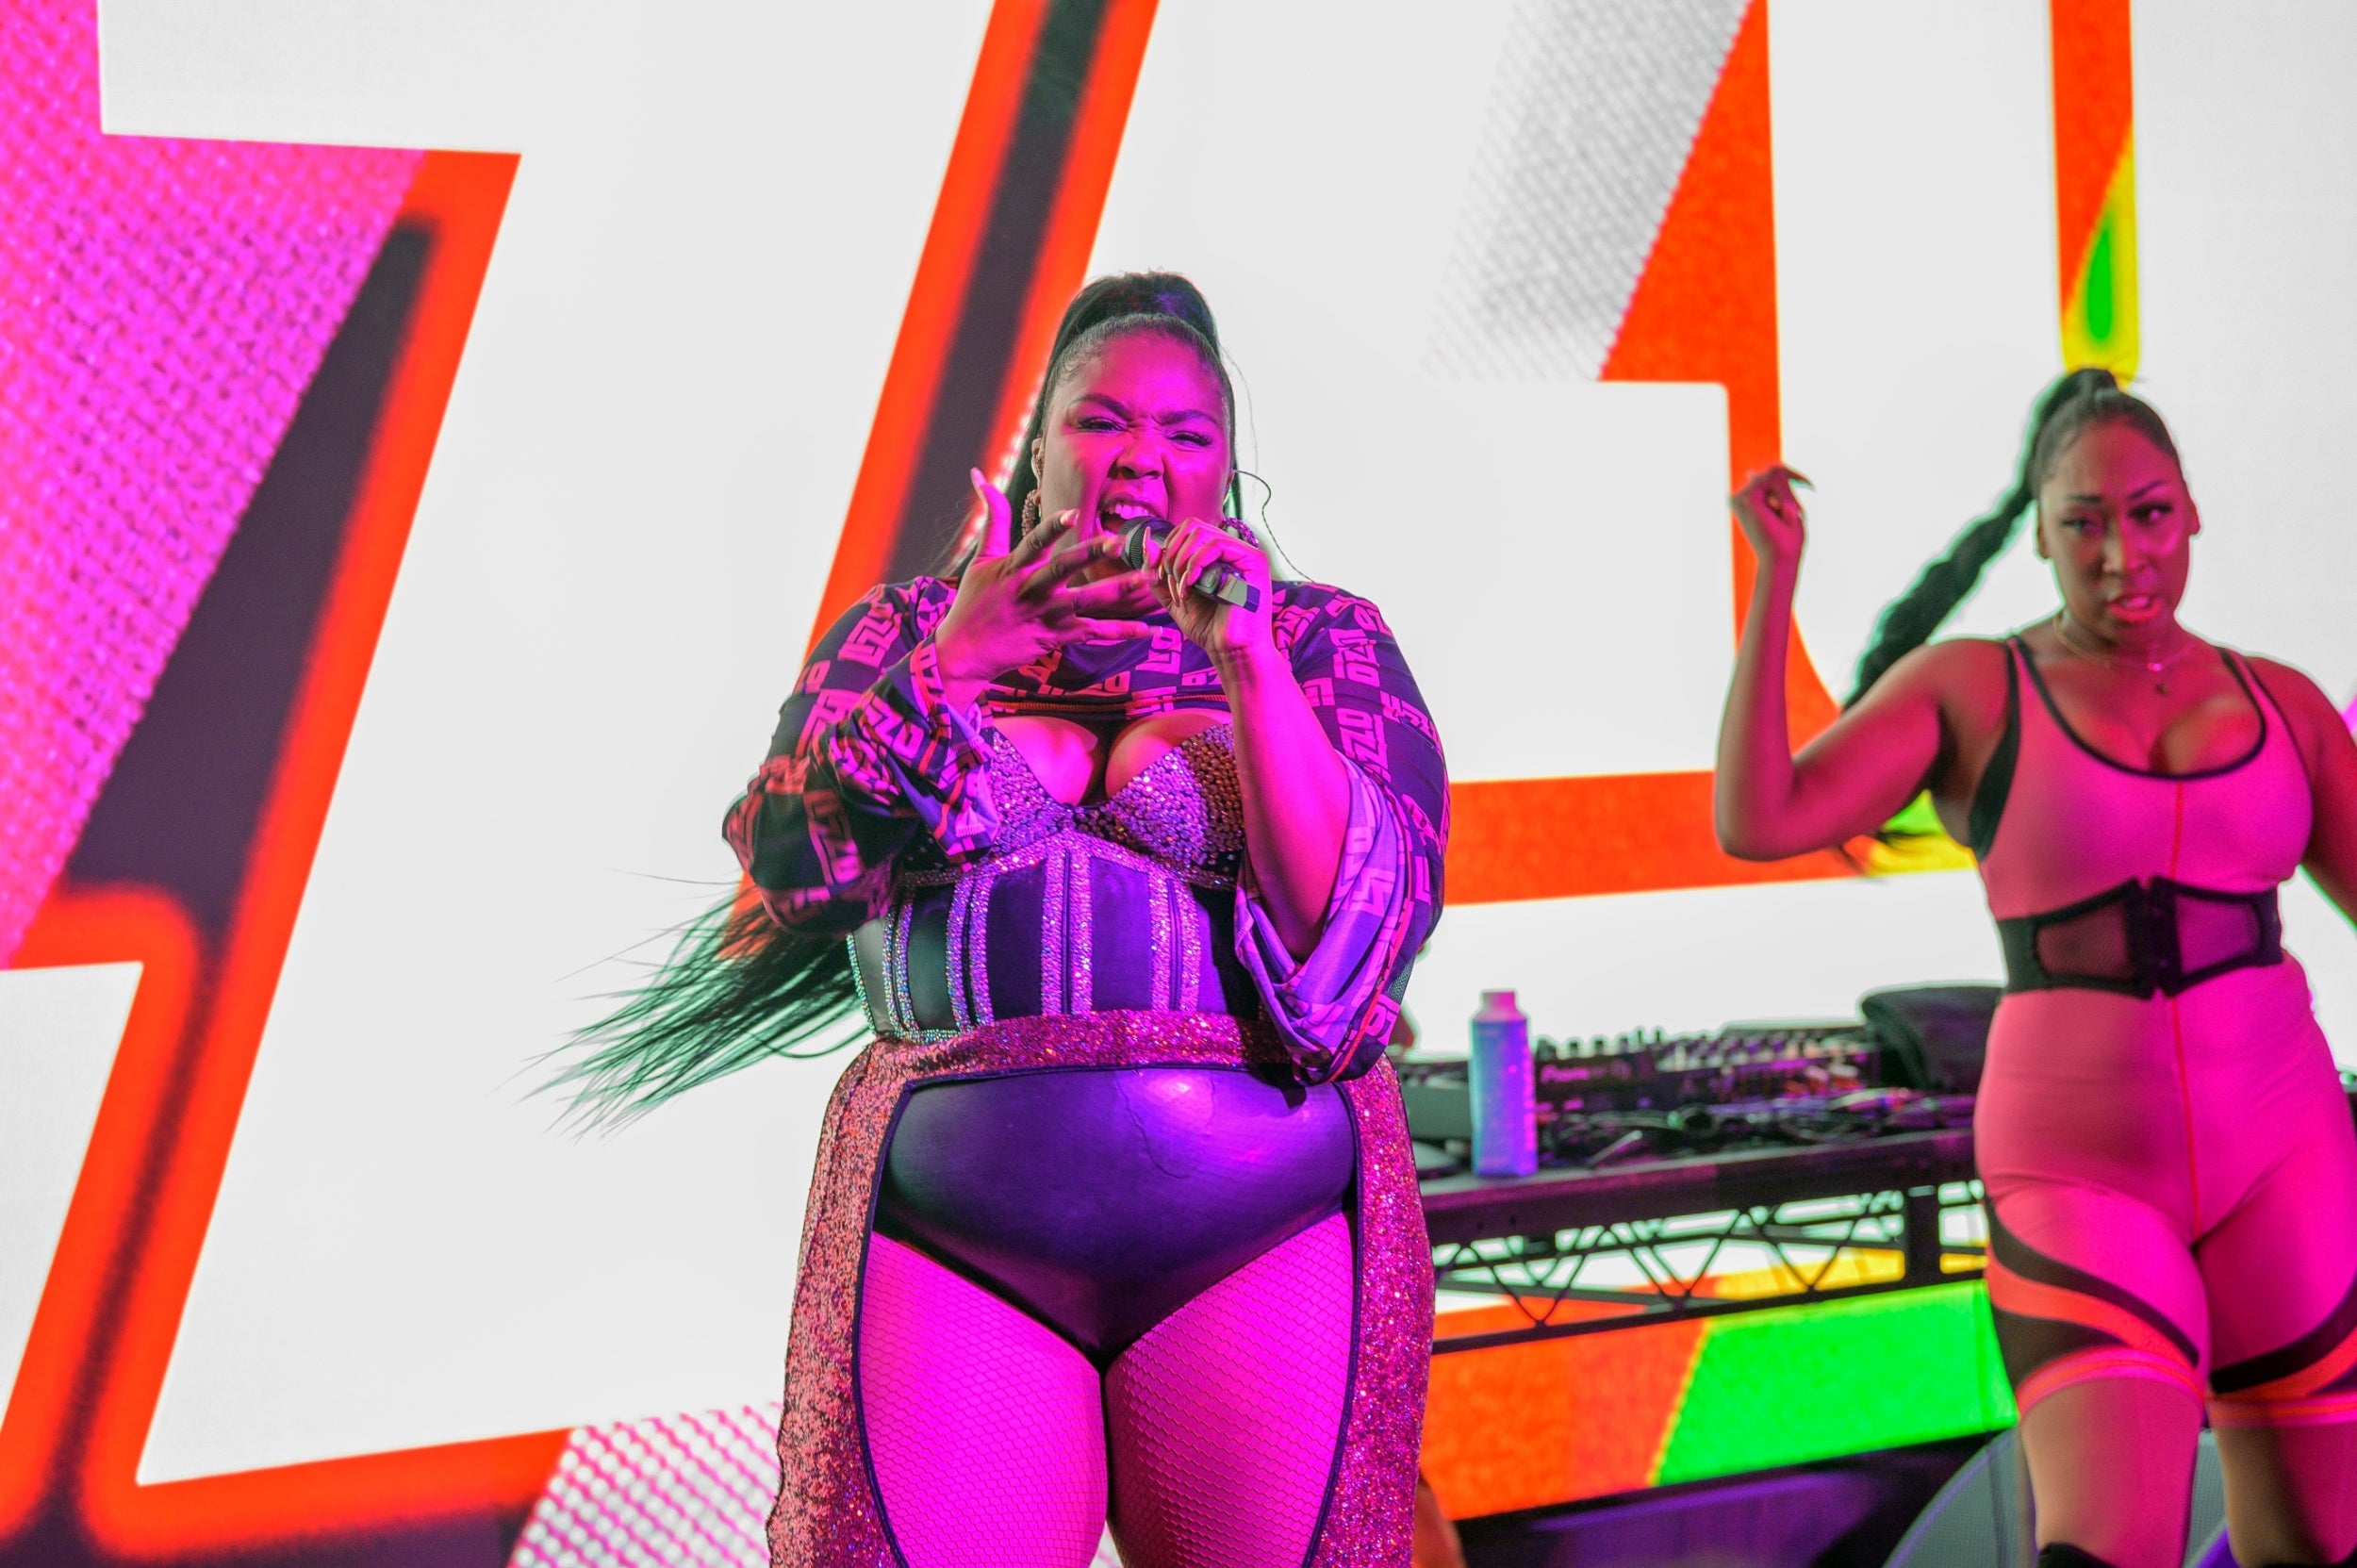 Lizzo performing at the NYC Pride Kickoff Event, 26 June 2019